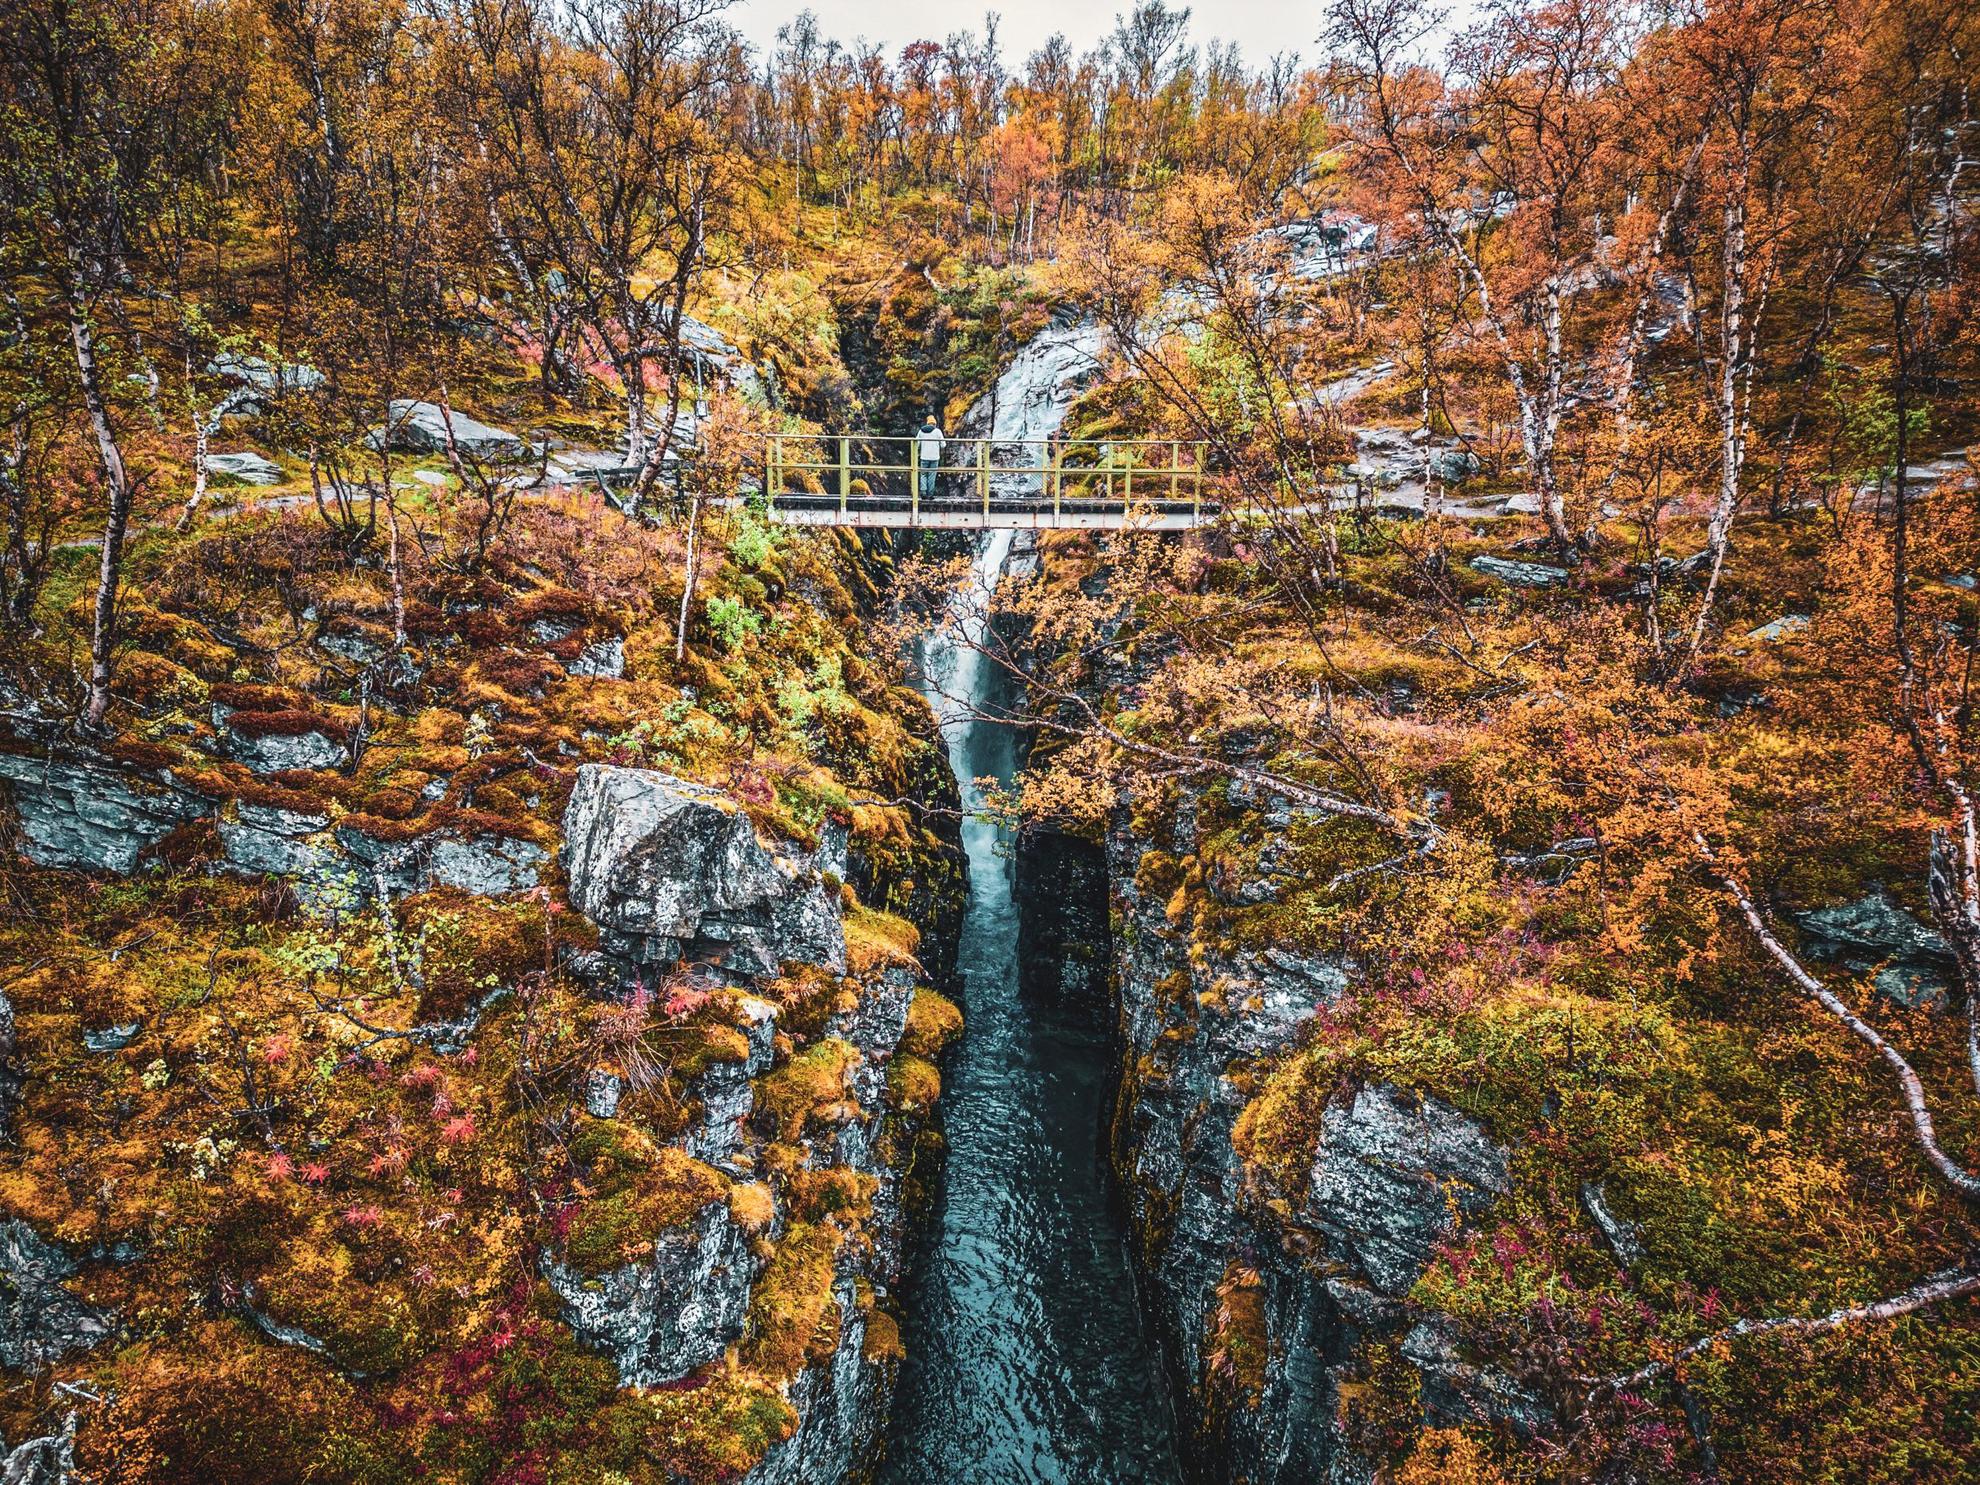 A person stands on a small bridge and looks at a waterfall during autumn.